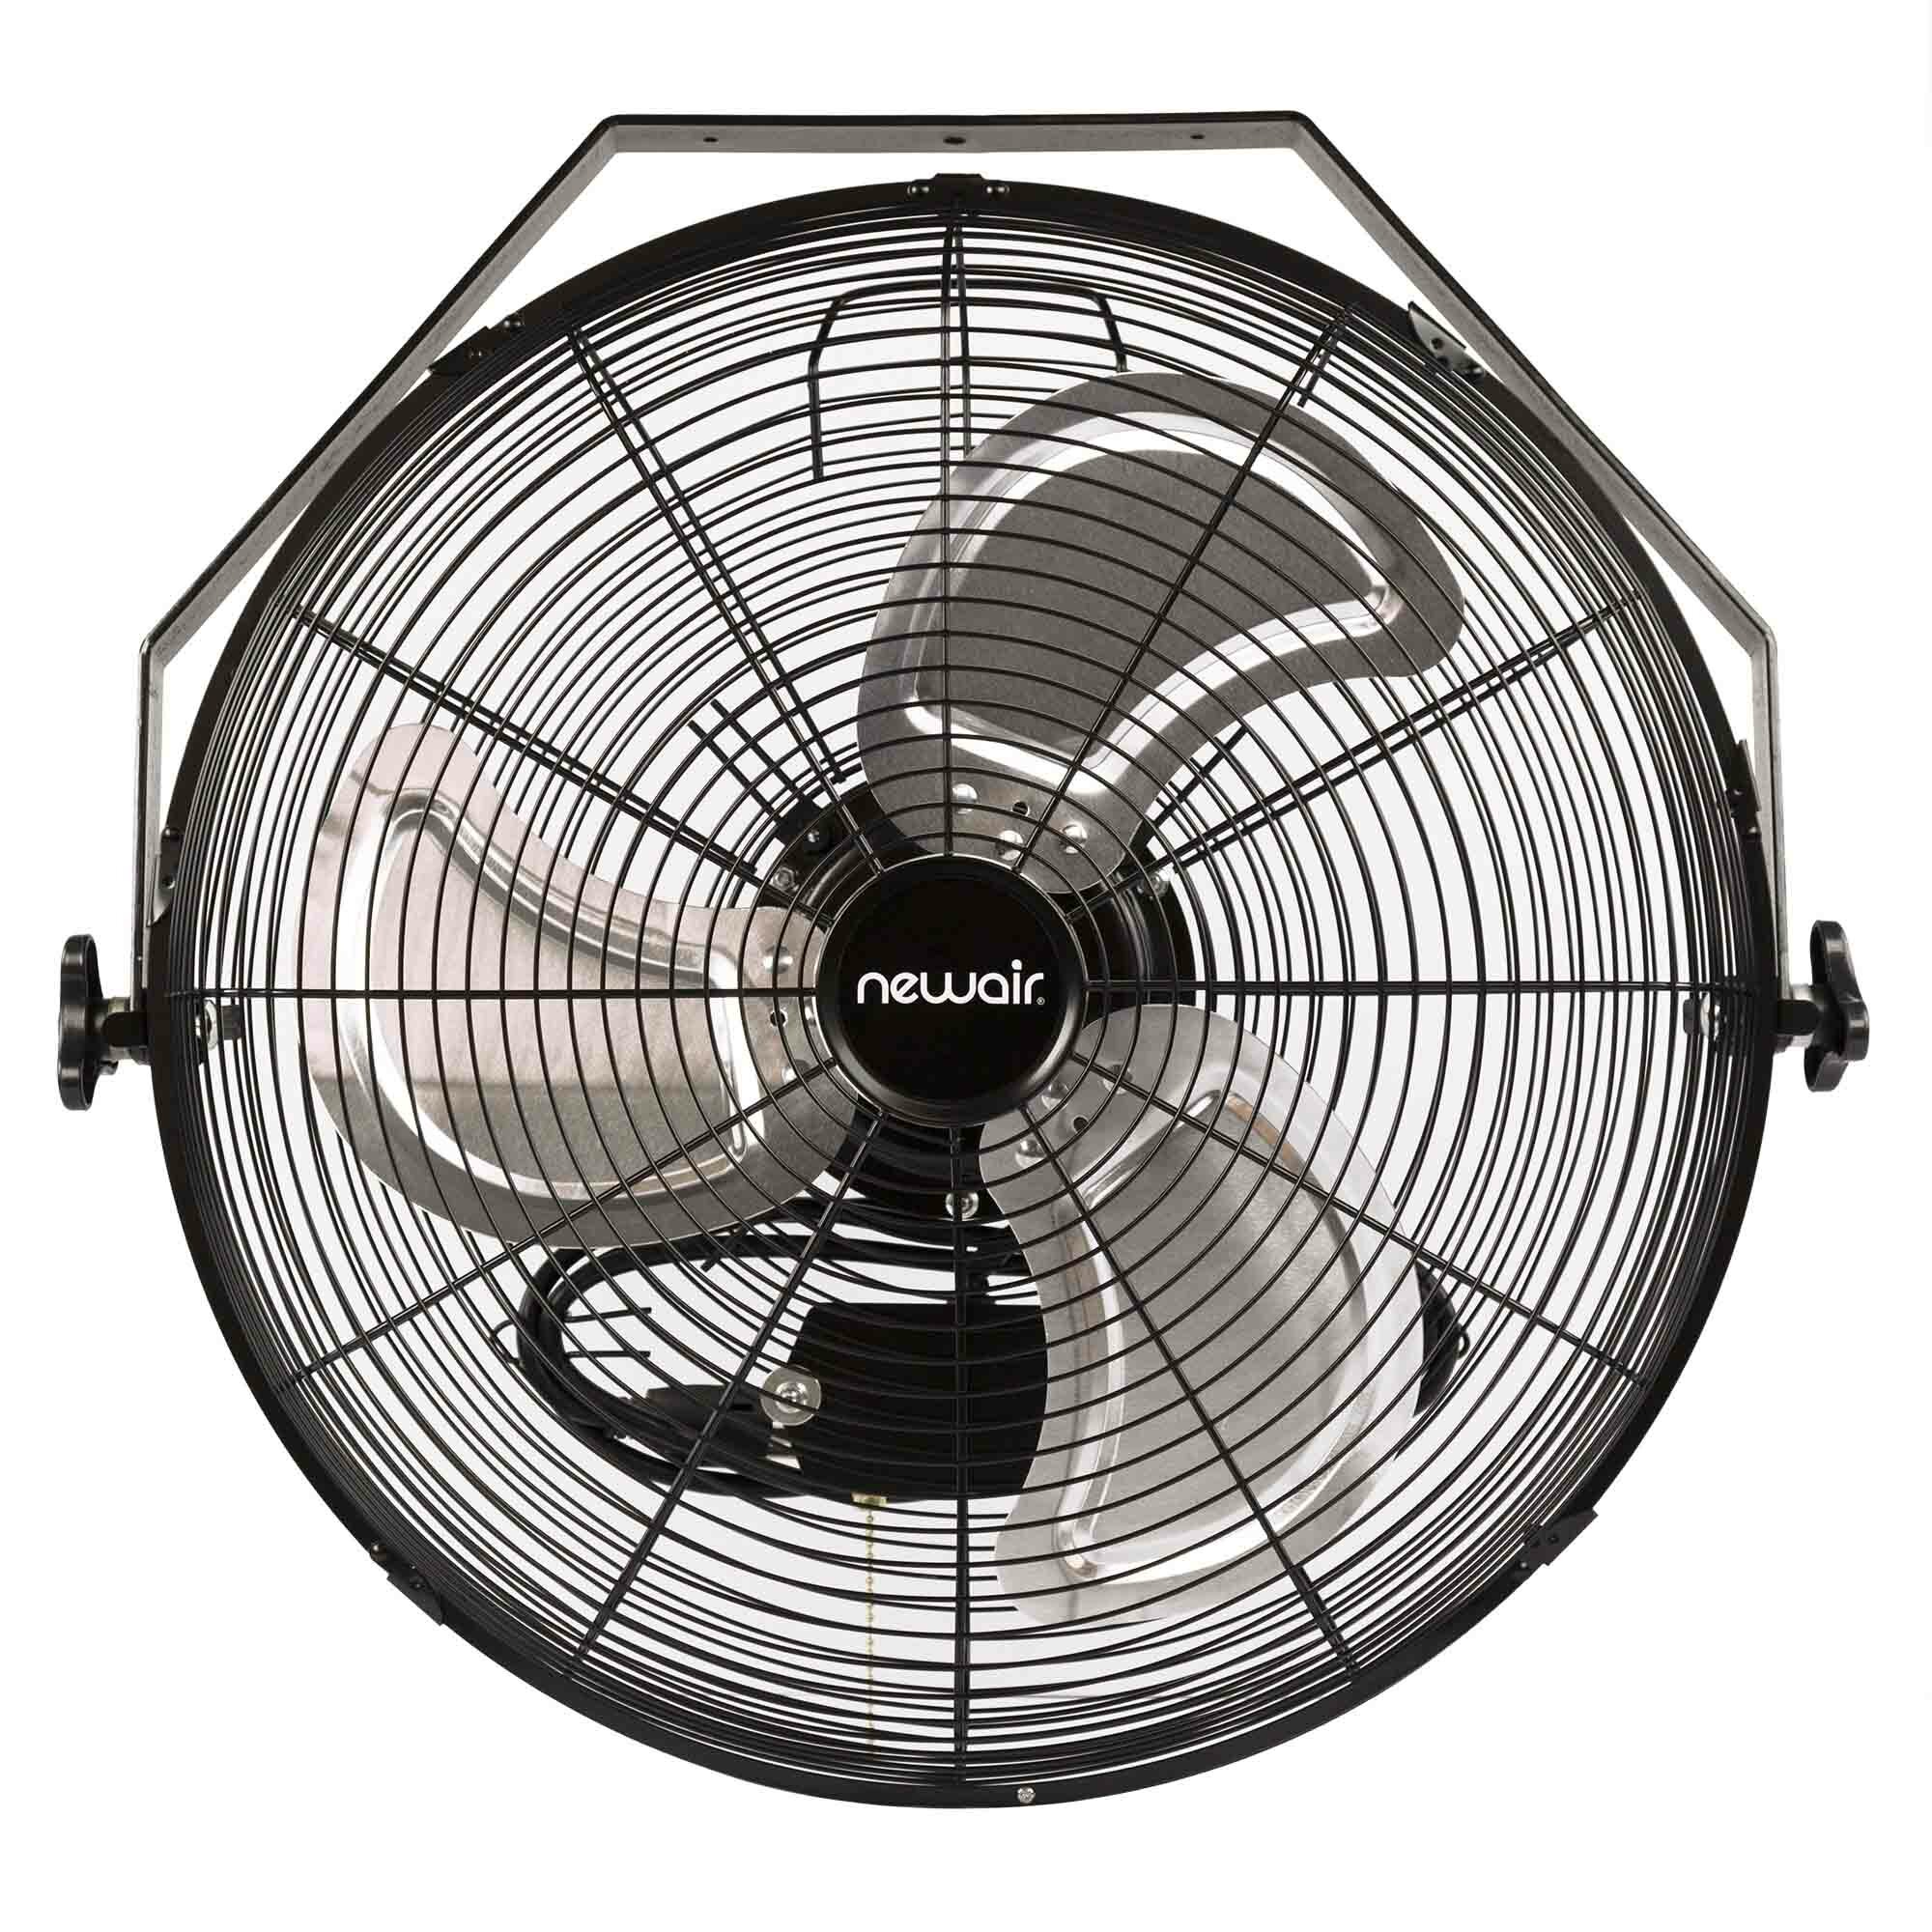 All Metal Commercial Grade 30" High Velocity Oscillating Wall Mount Fan